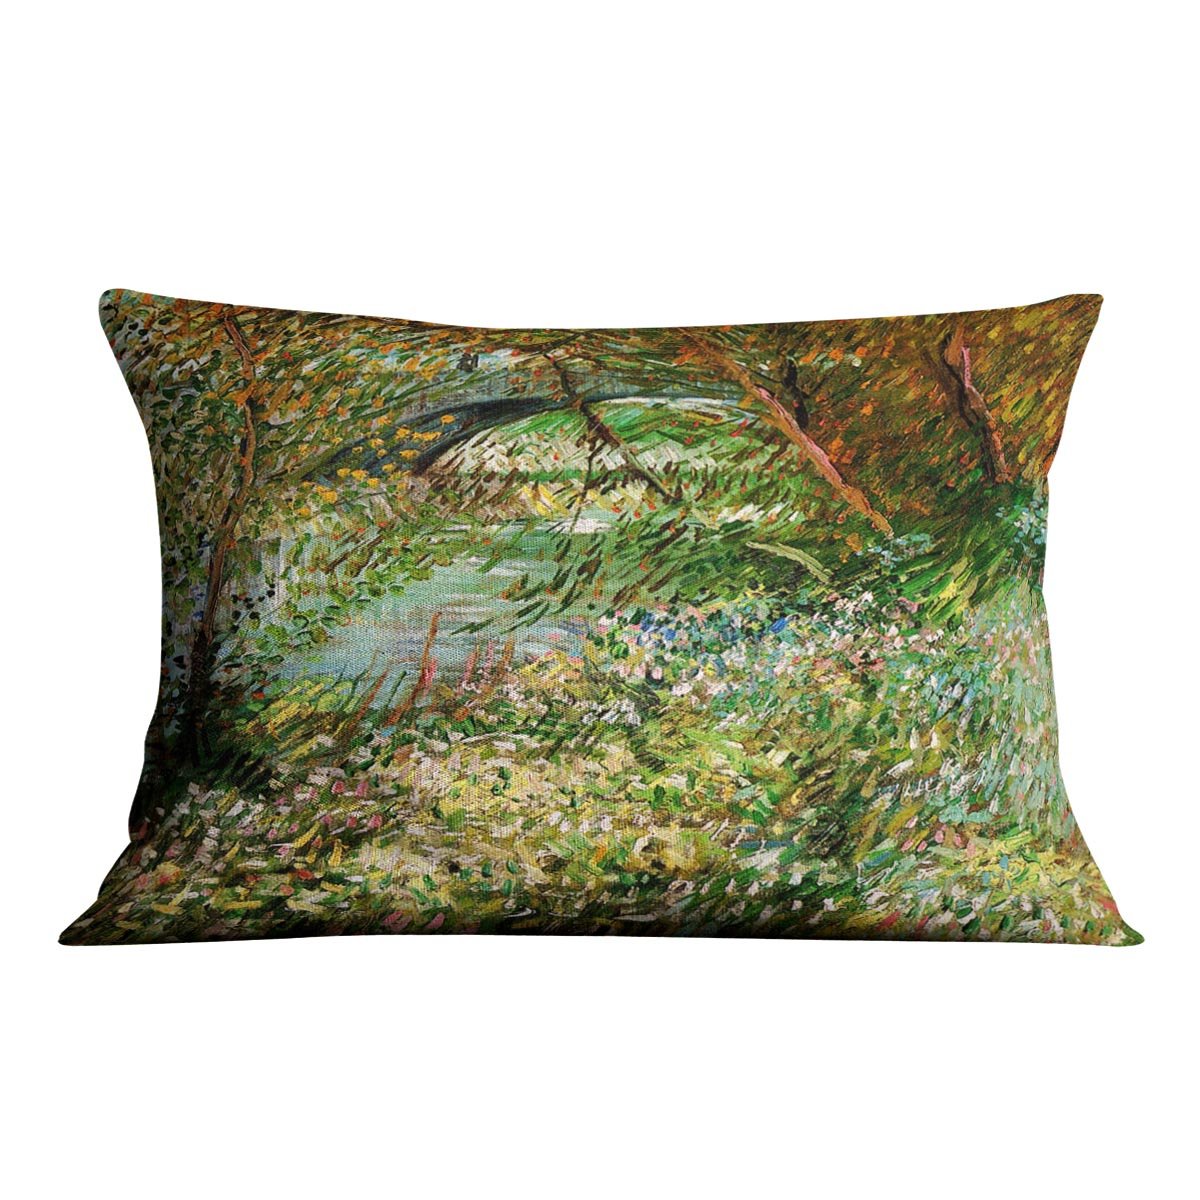 Banks of the Seine with Pont de Clichy in the Spring by Van Gogh Throw Pillow